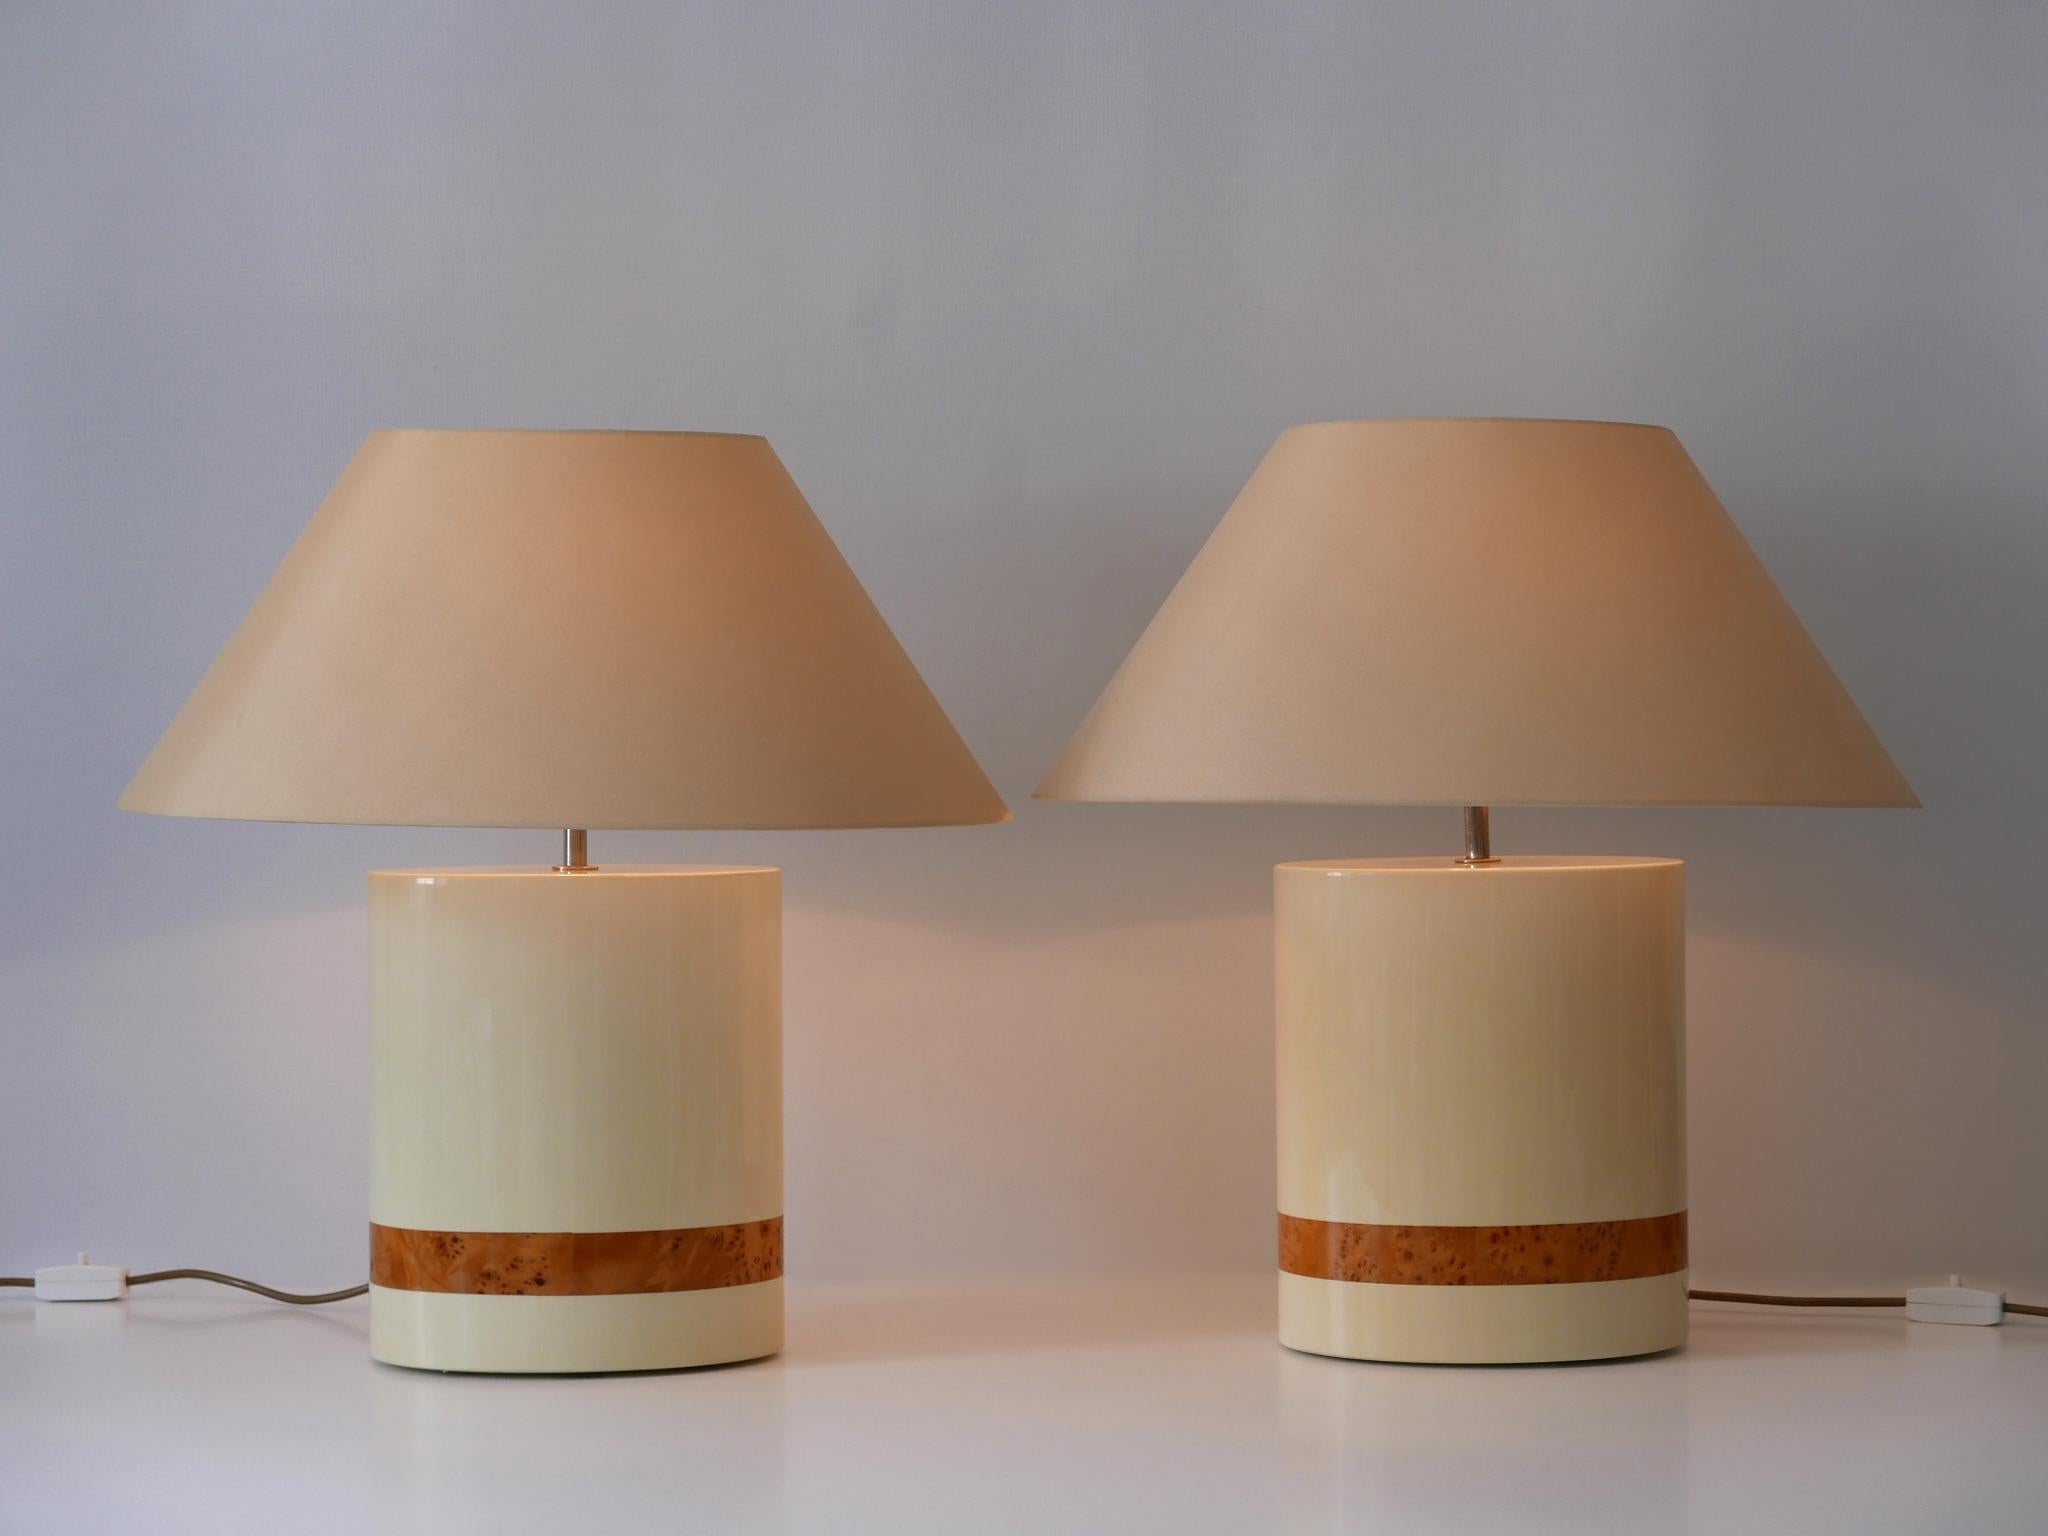 Set of two rare and beautiful Mid-Century Modern table lamps. Designed by Tommaso Barbi, Italy, 1970s. Label under the base.

Executed in creme colored plastic, metal and fabric, each lamp comes with 1 x E27 / E26 Edison screw fit bulb holder, is